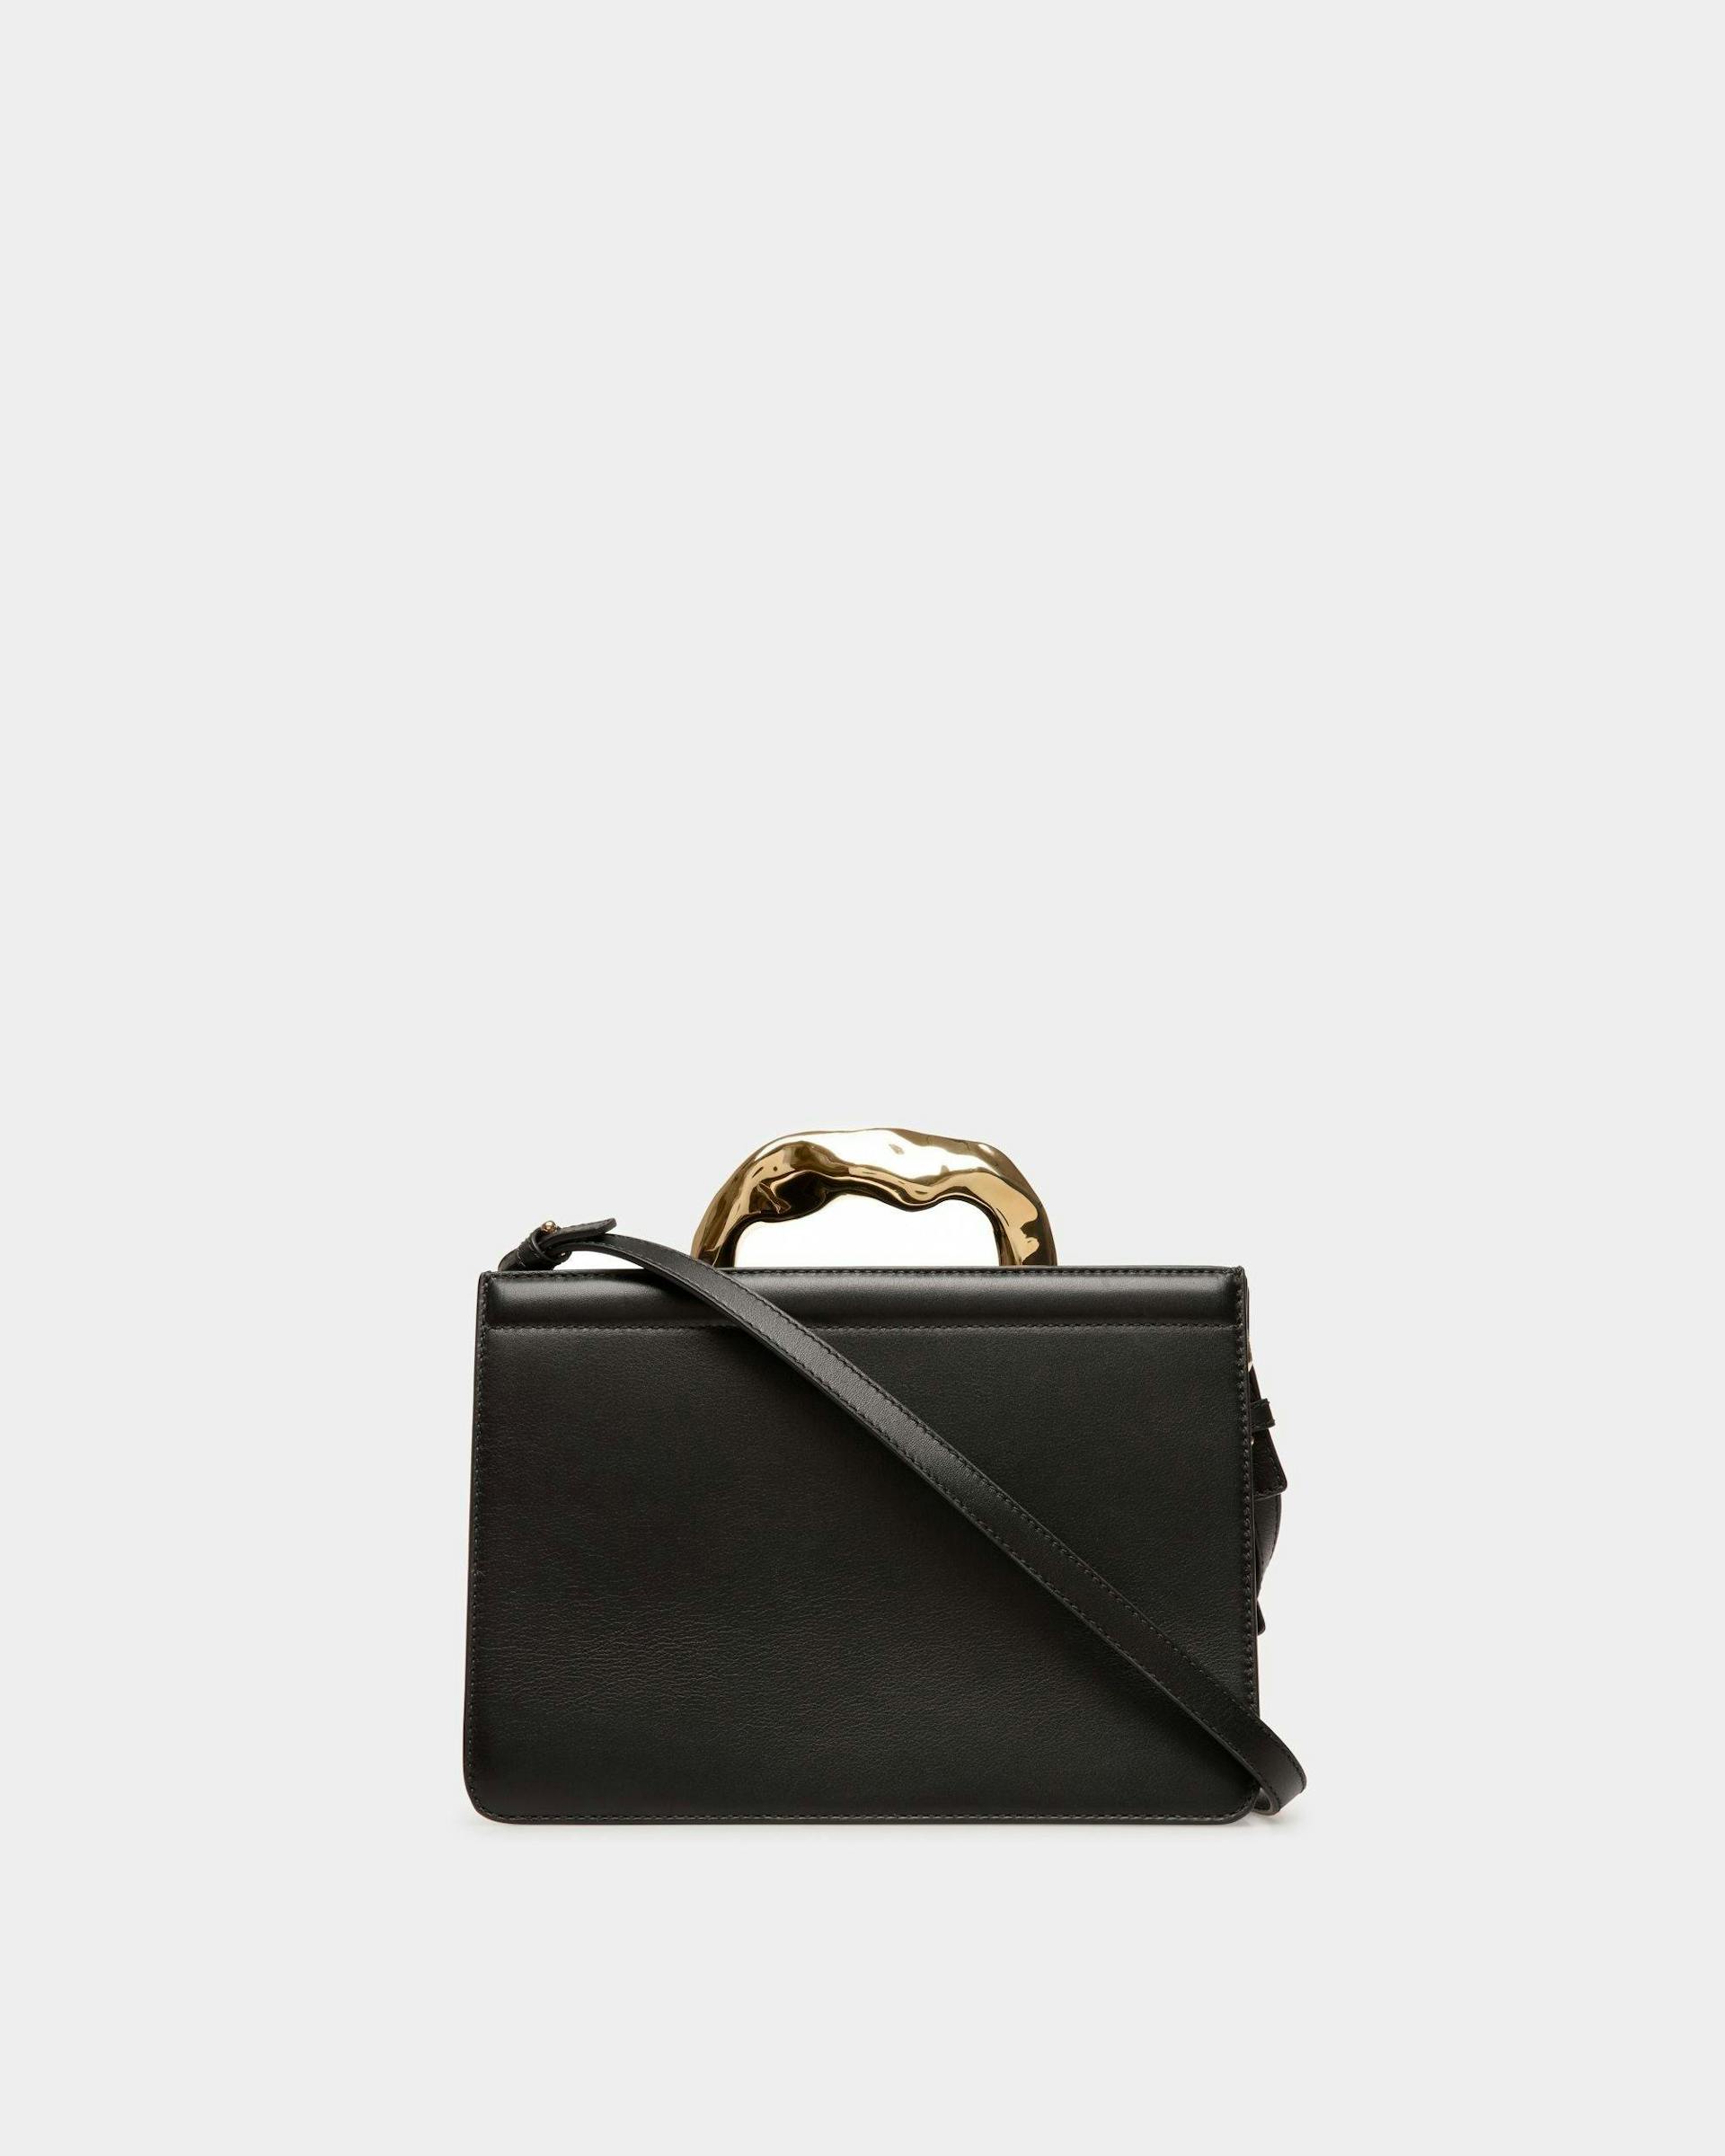 Women's Baroque Top Handle Bag In Black Leather | Bally | Still Life Back